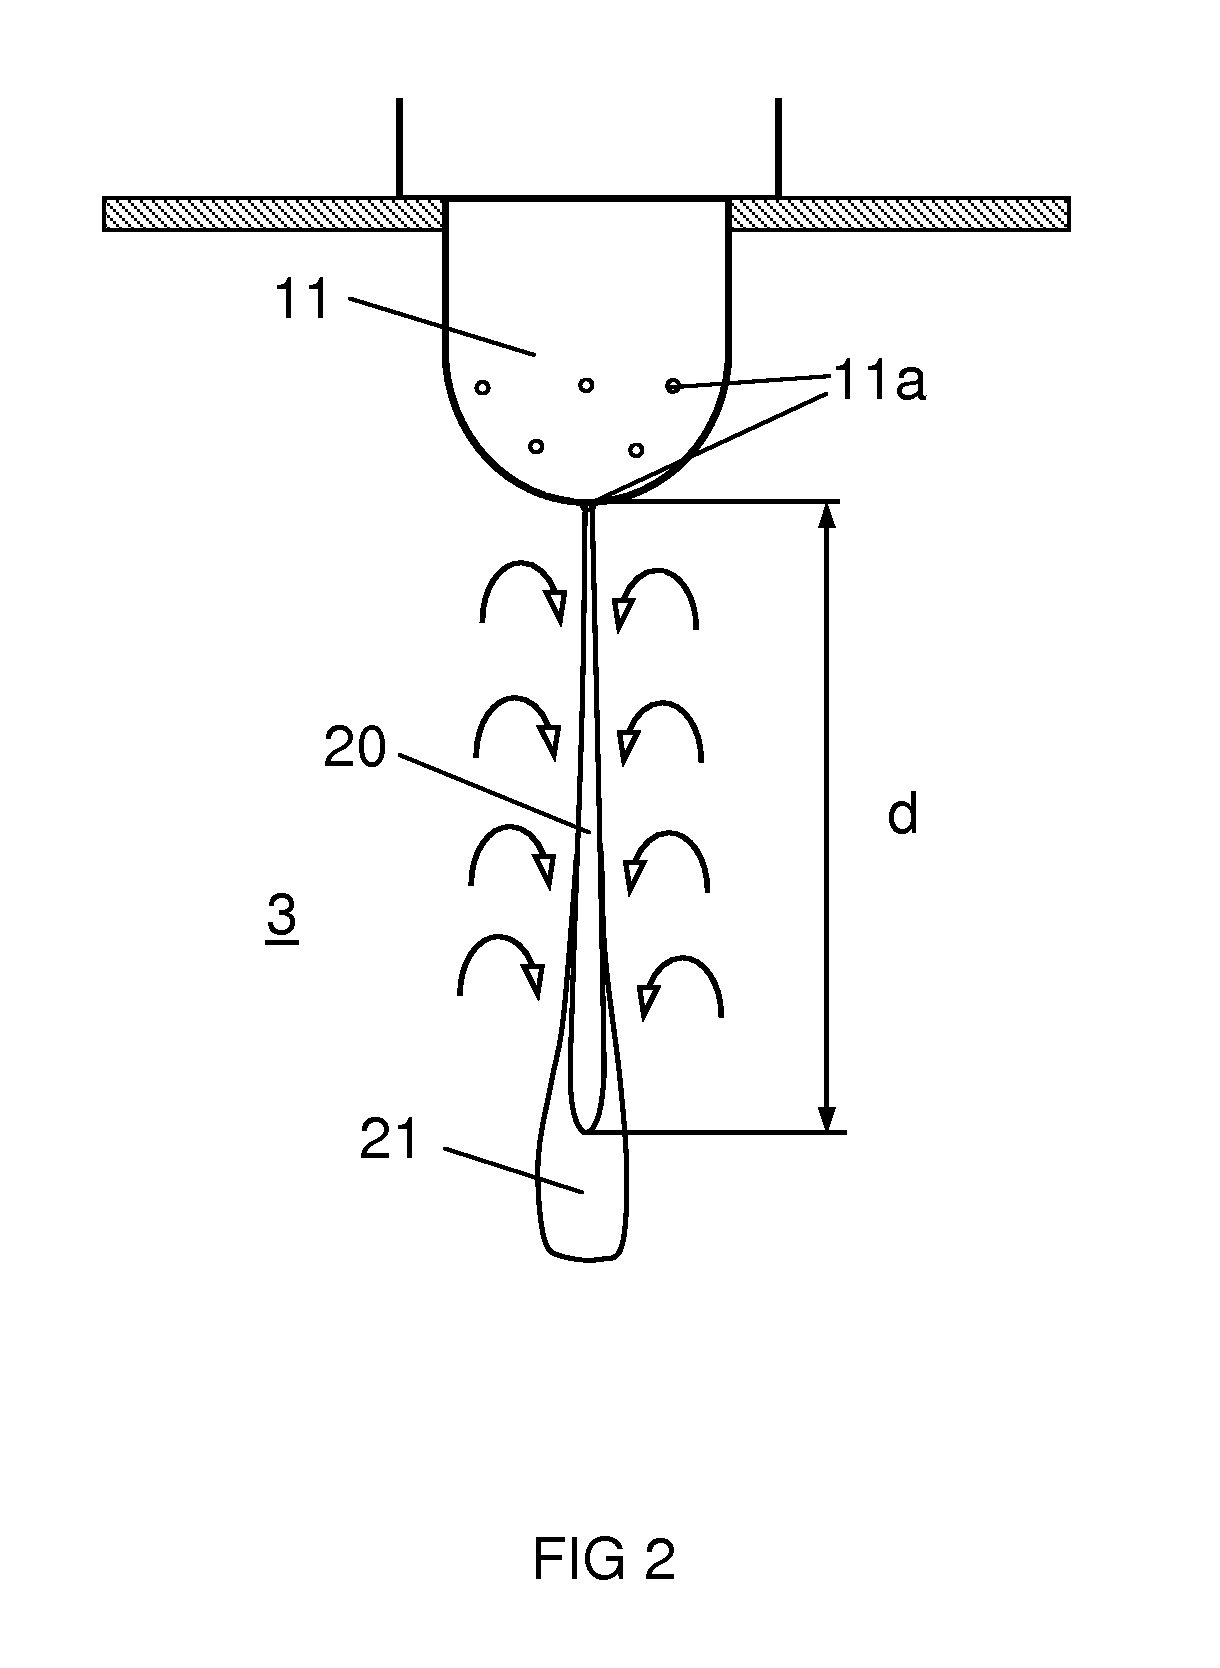 Arrangement and method for efficient combustion of fuel in a combustion engine